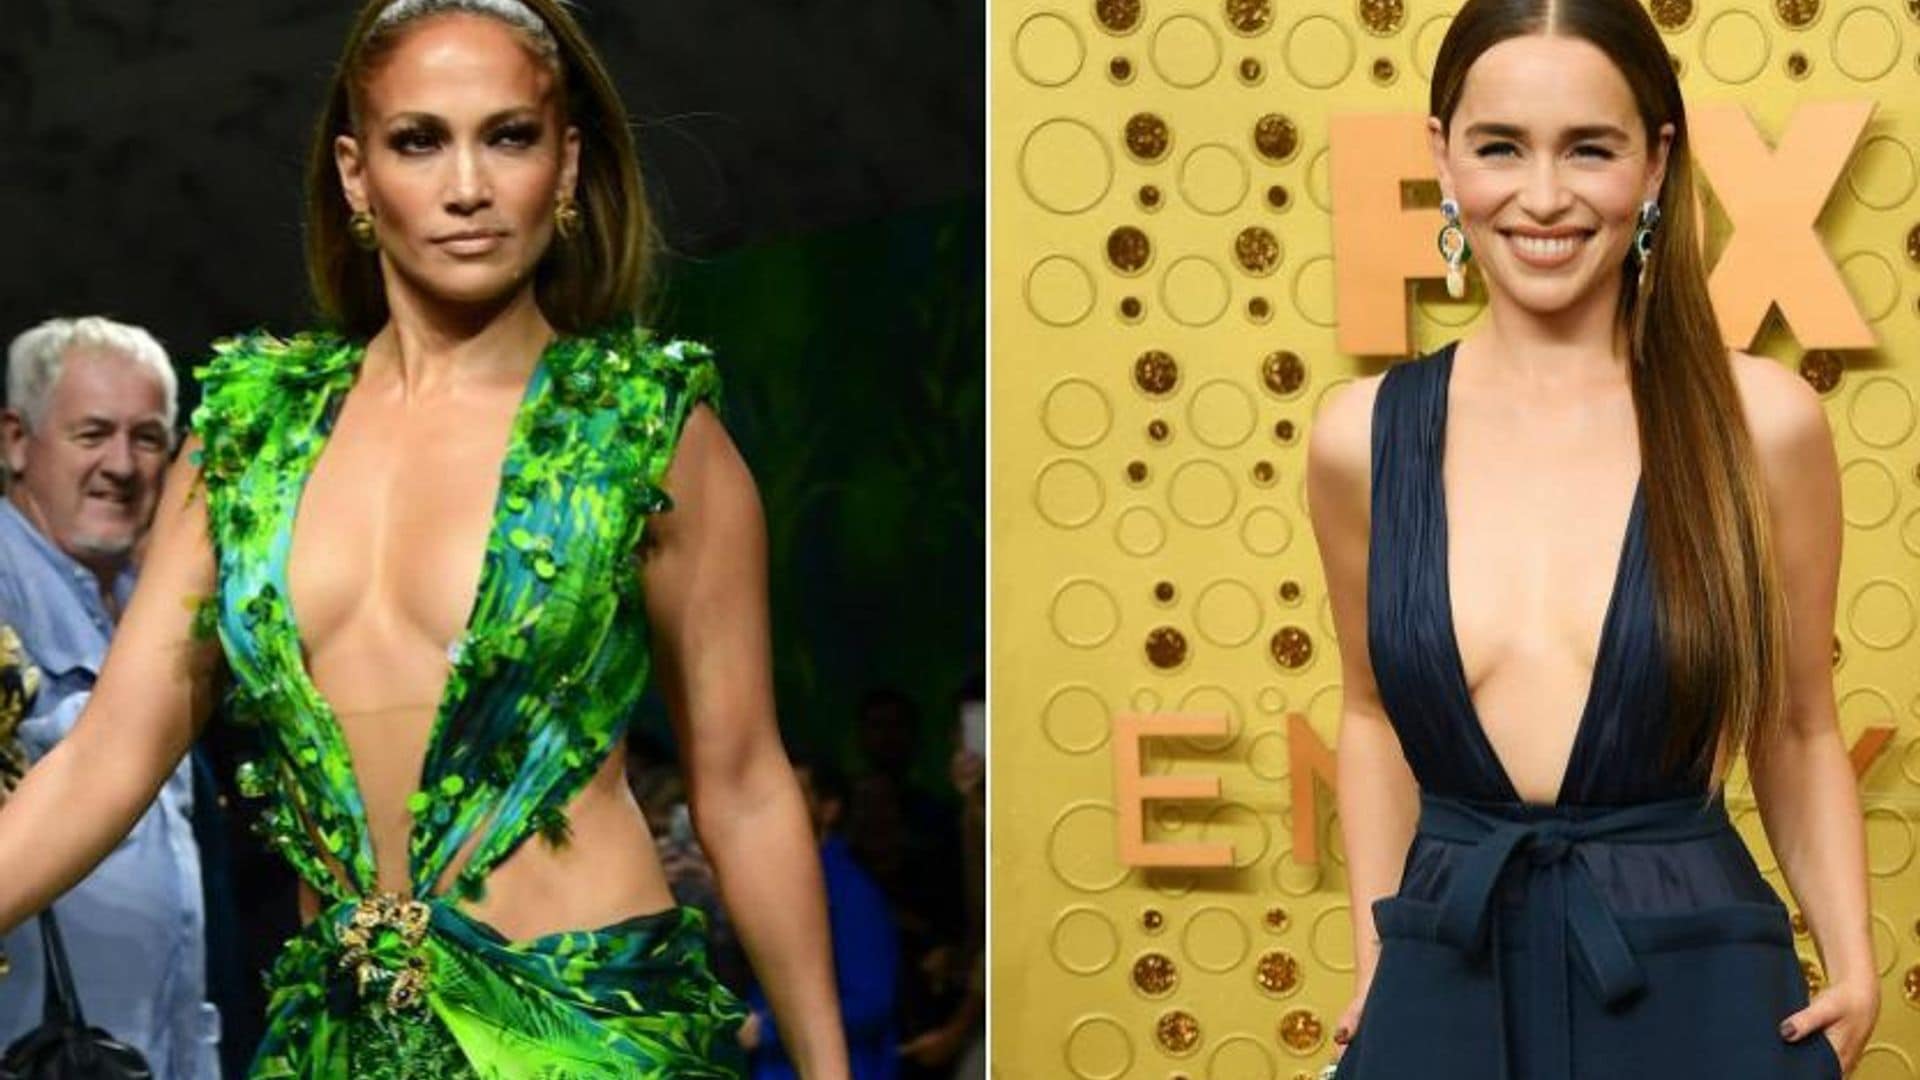 JLo reacts to Emilia Clarke channeling her at Emmys 2019